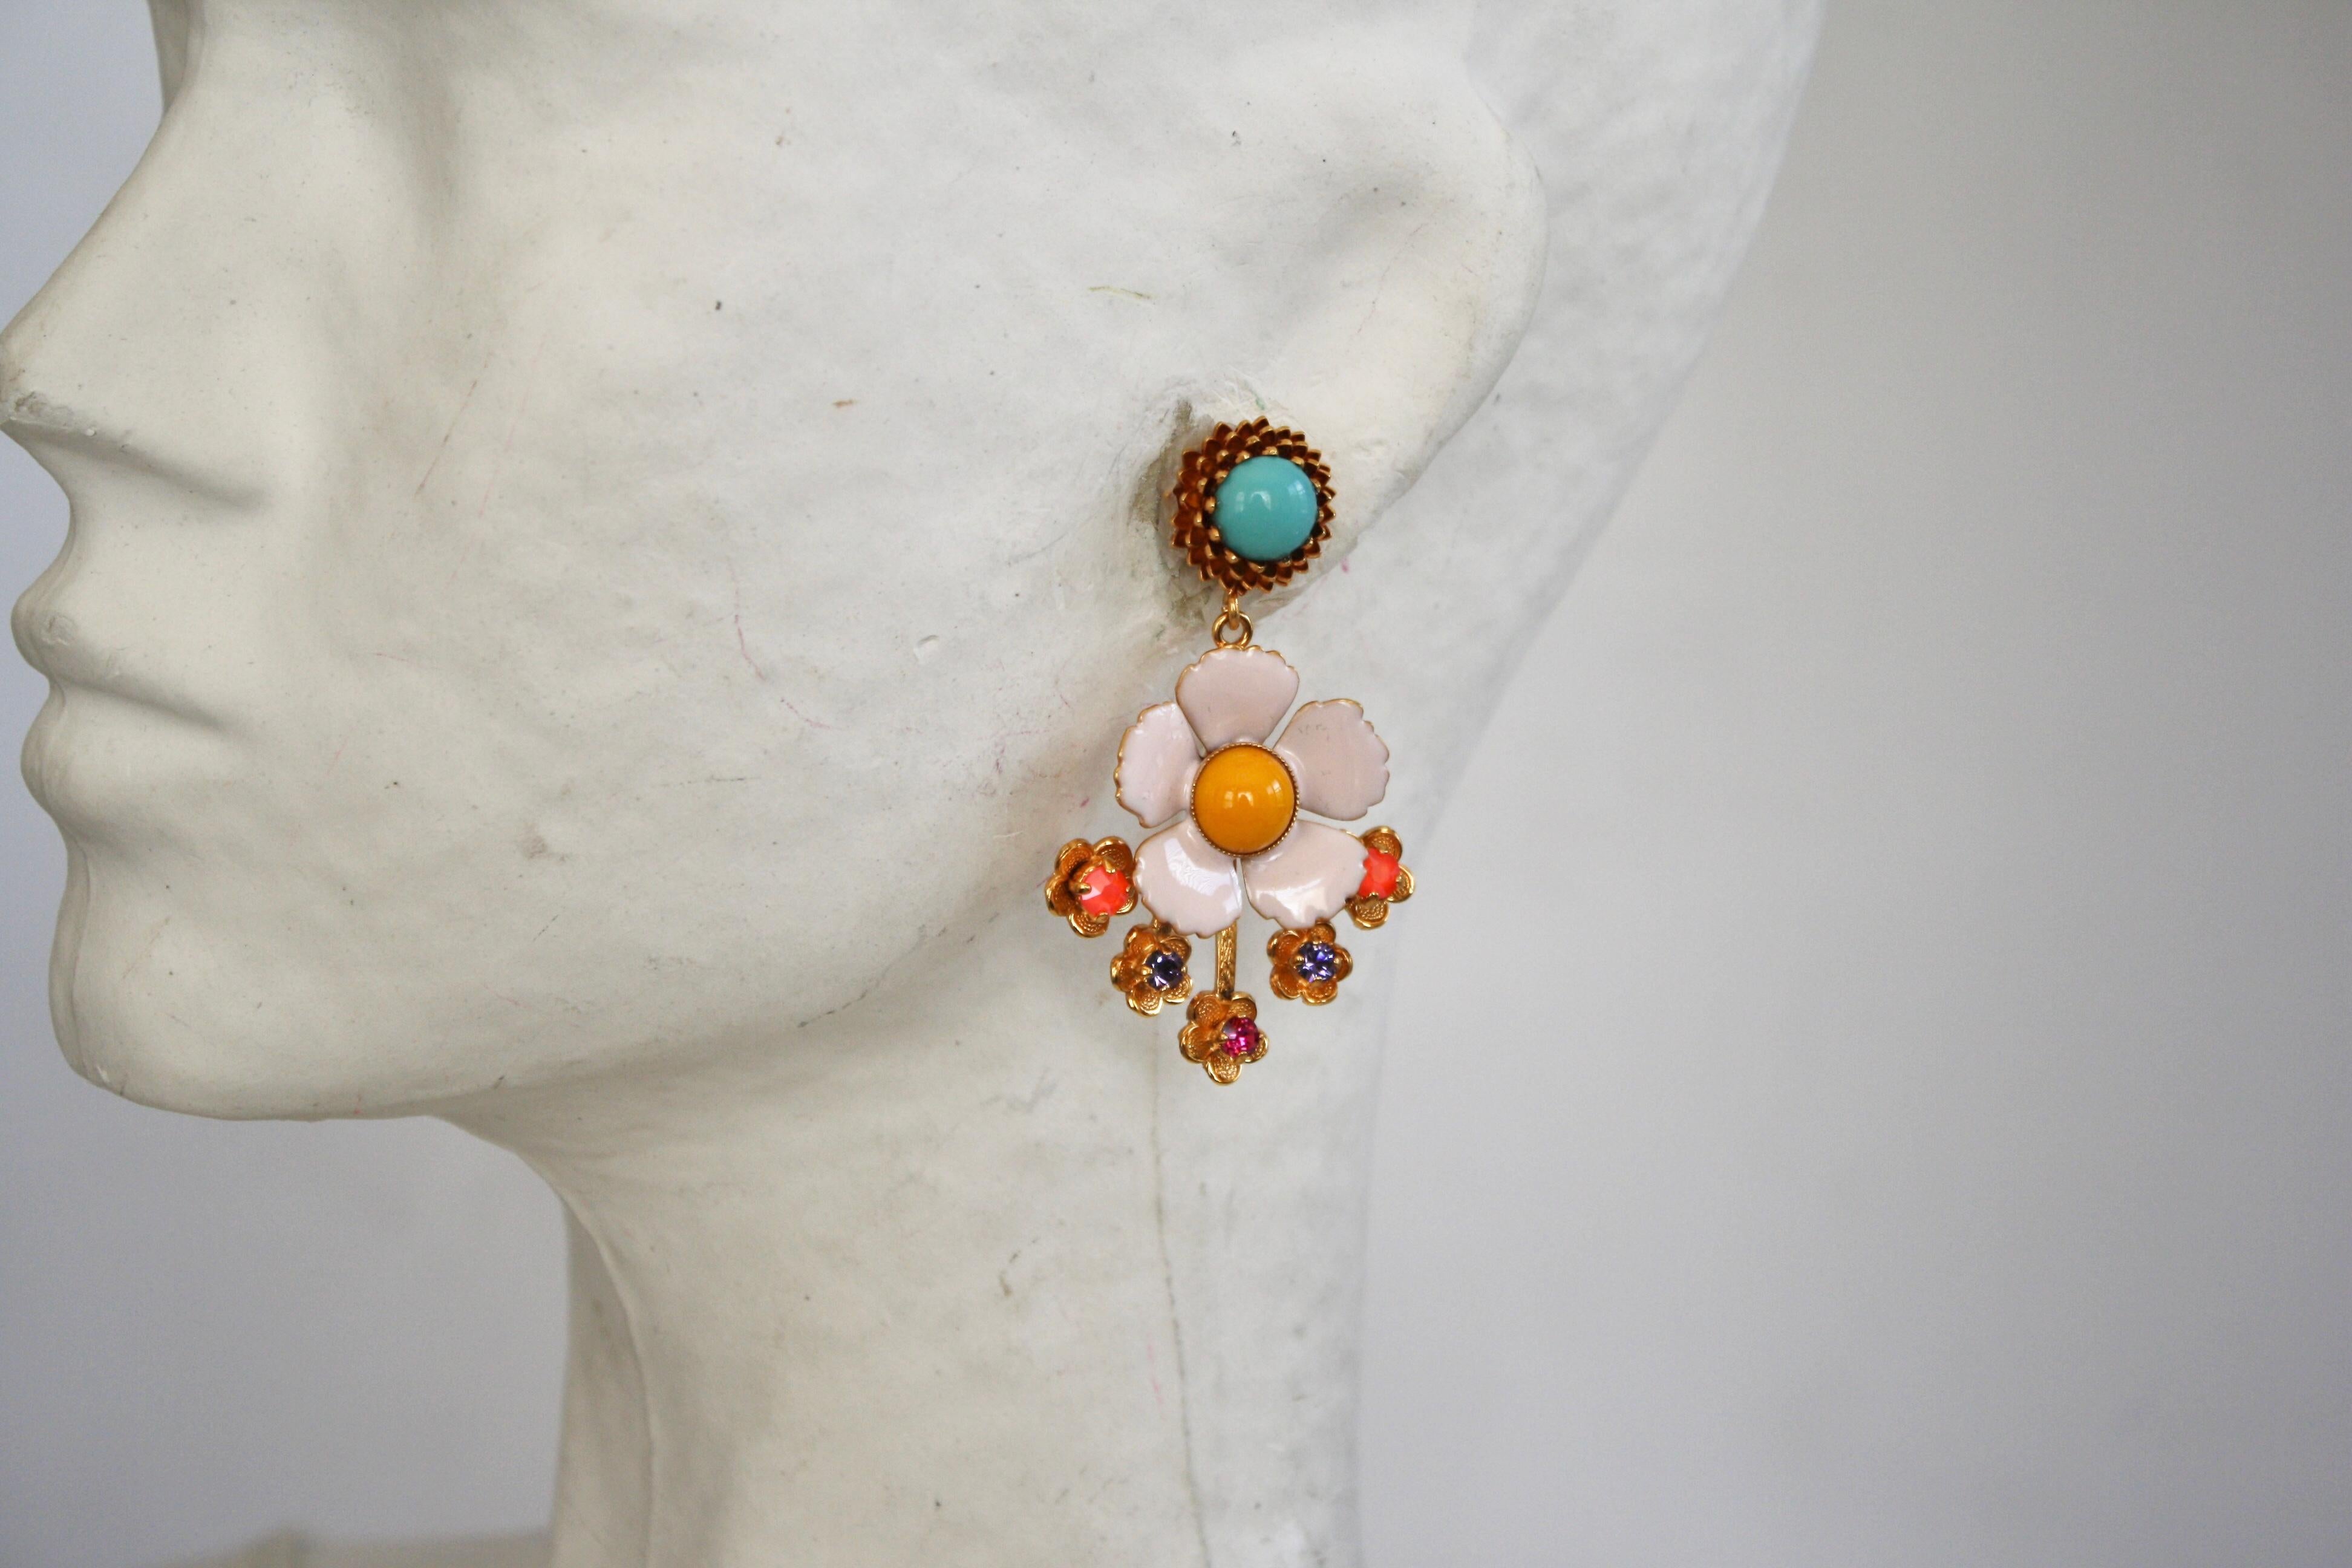 Floral motif pierced earrings made with enamel and glass from Philippe Ferrandis. 